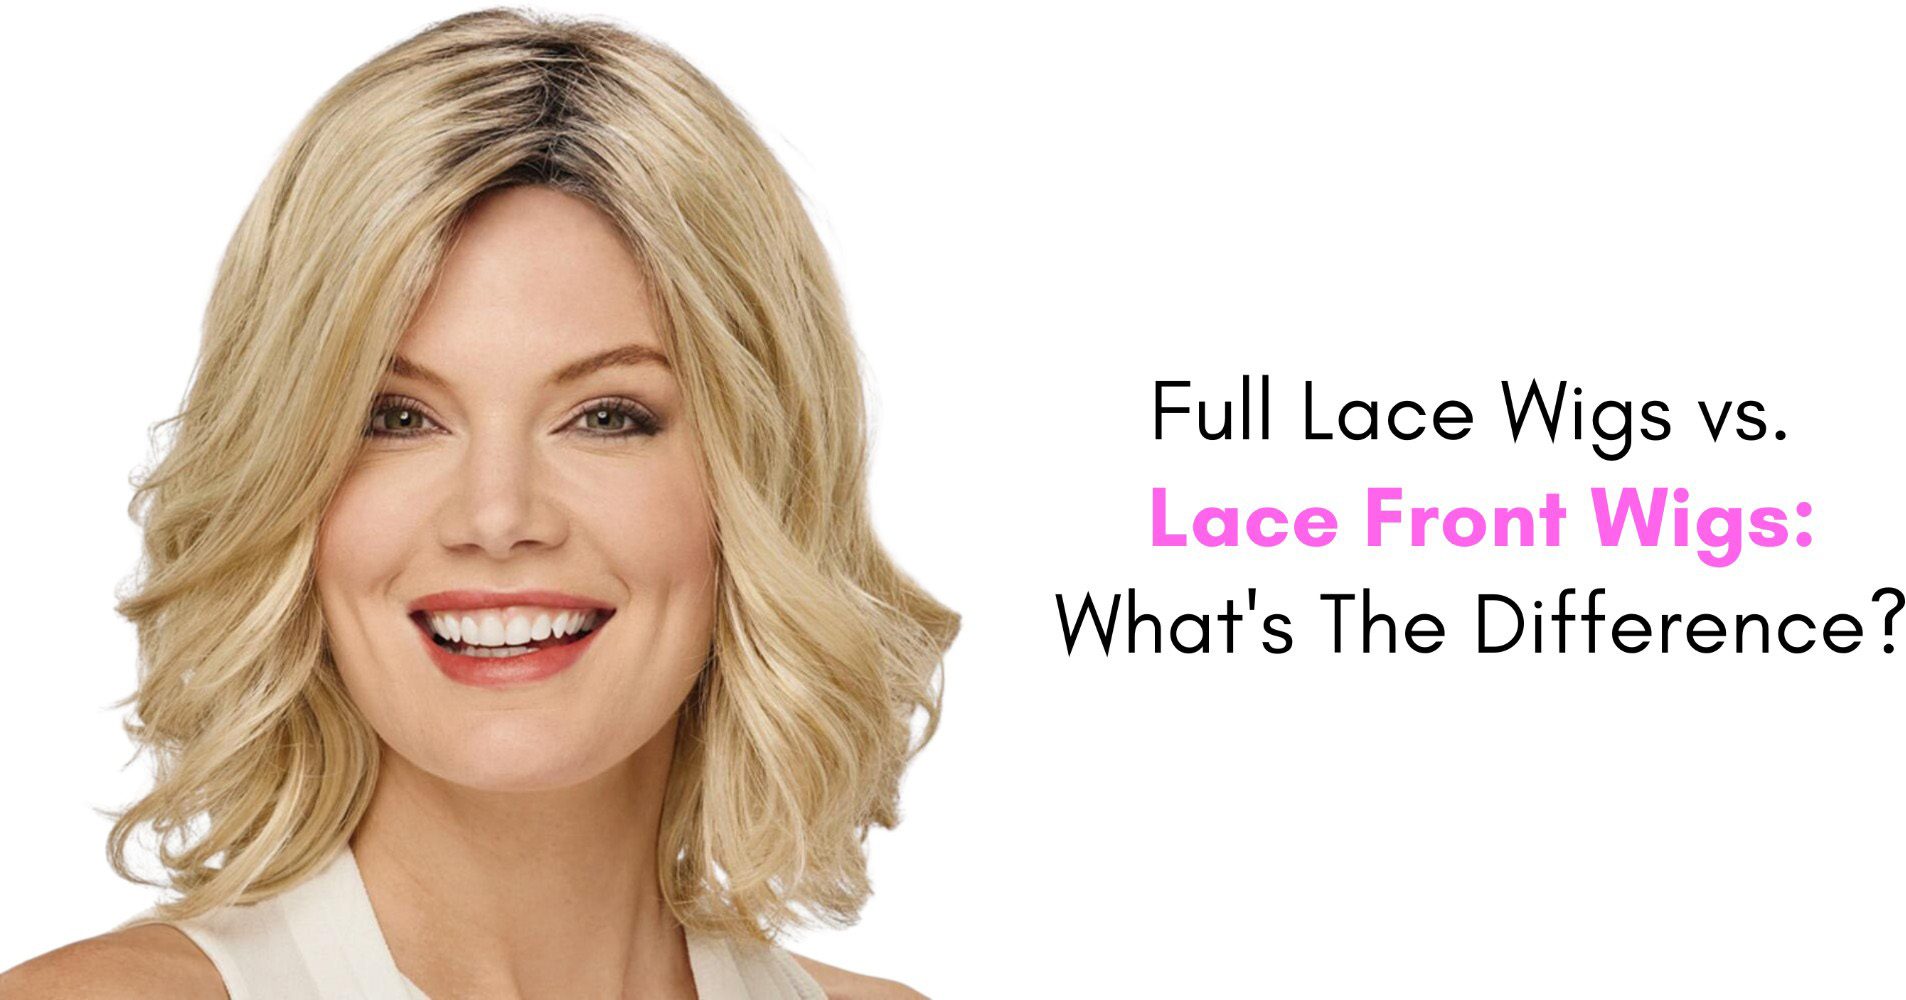 Full Lace Wigs vs. Lace Front Wigs: What’s The Difference?